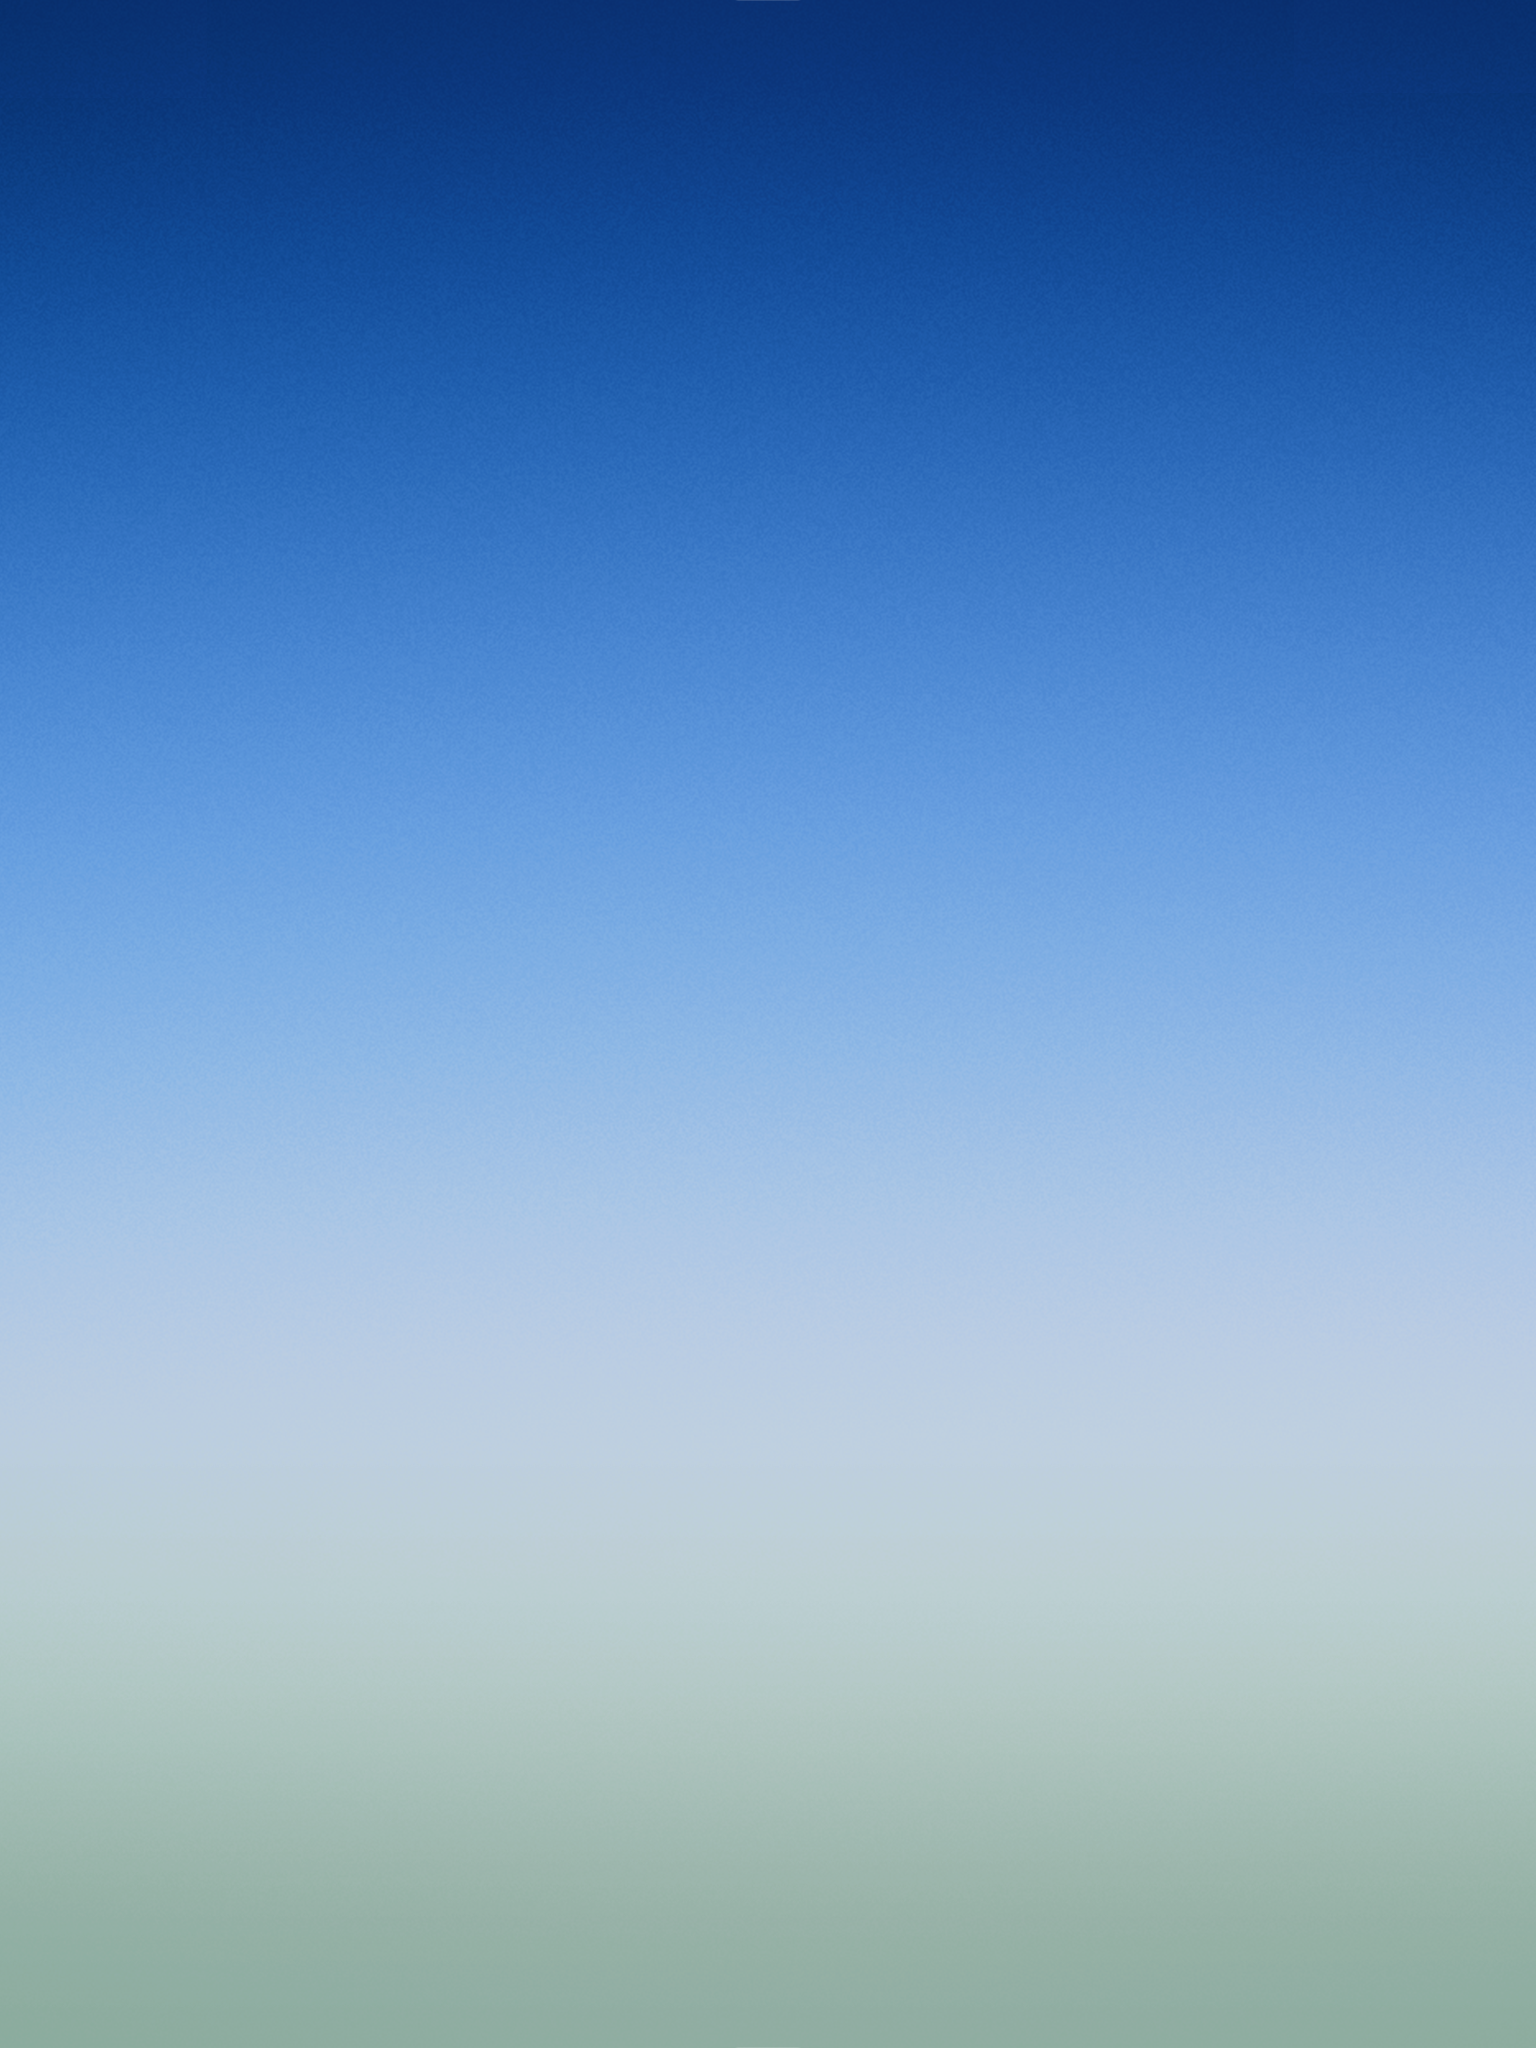 Download iOS 7 Wallpaper for iPad 1536 2048 resolution